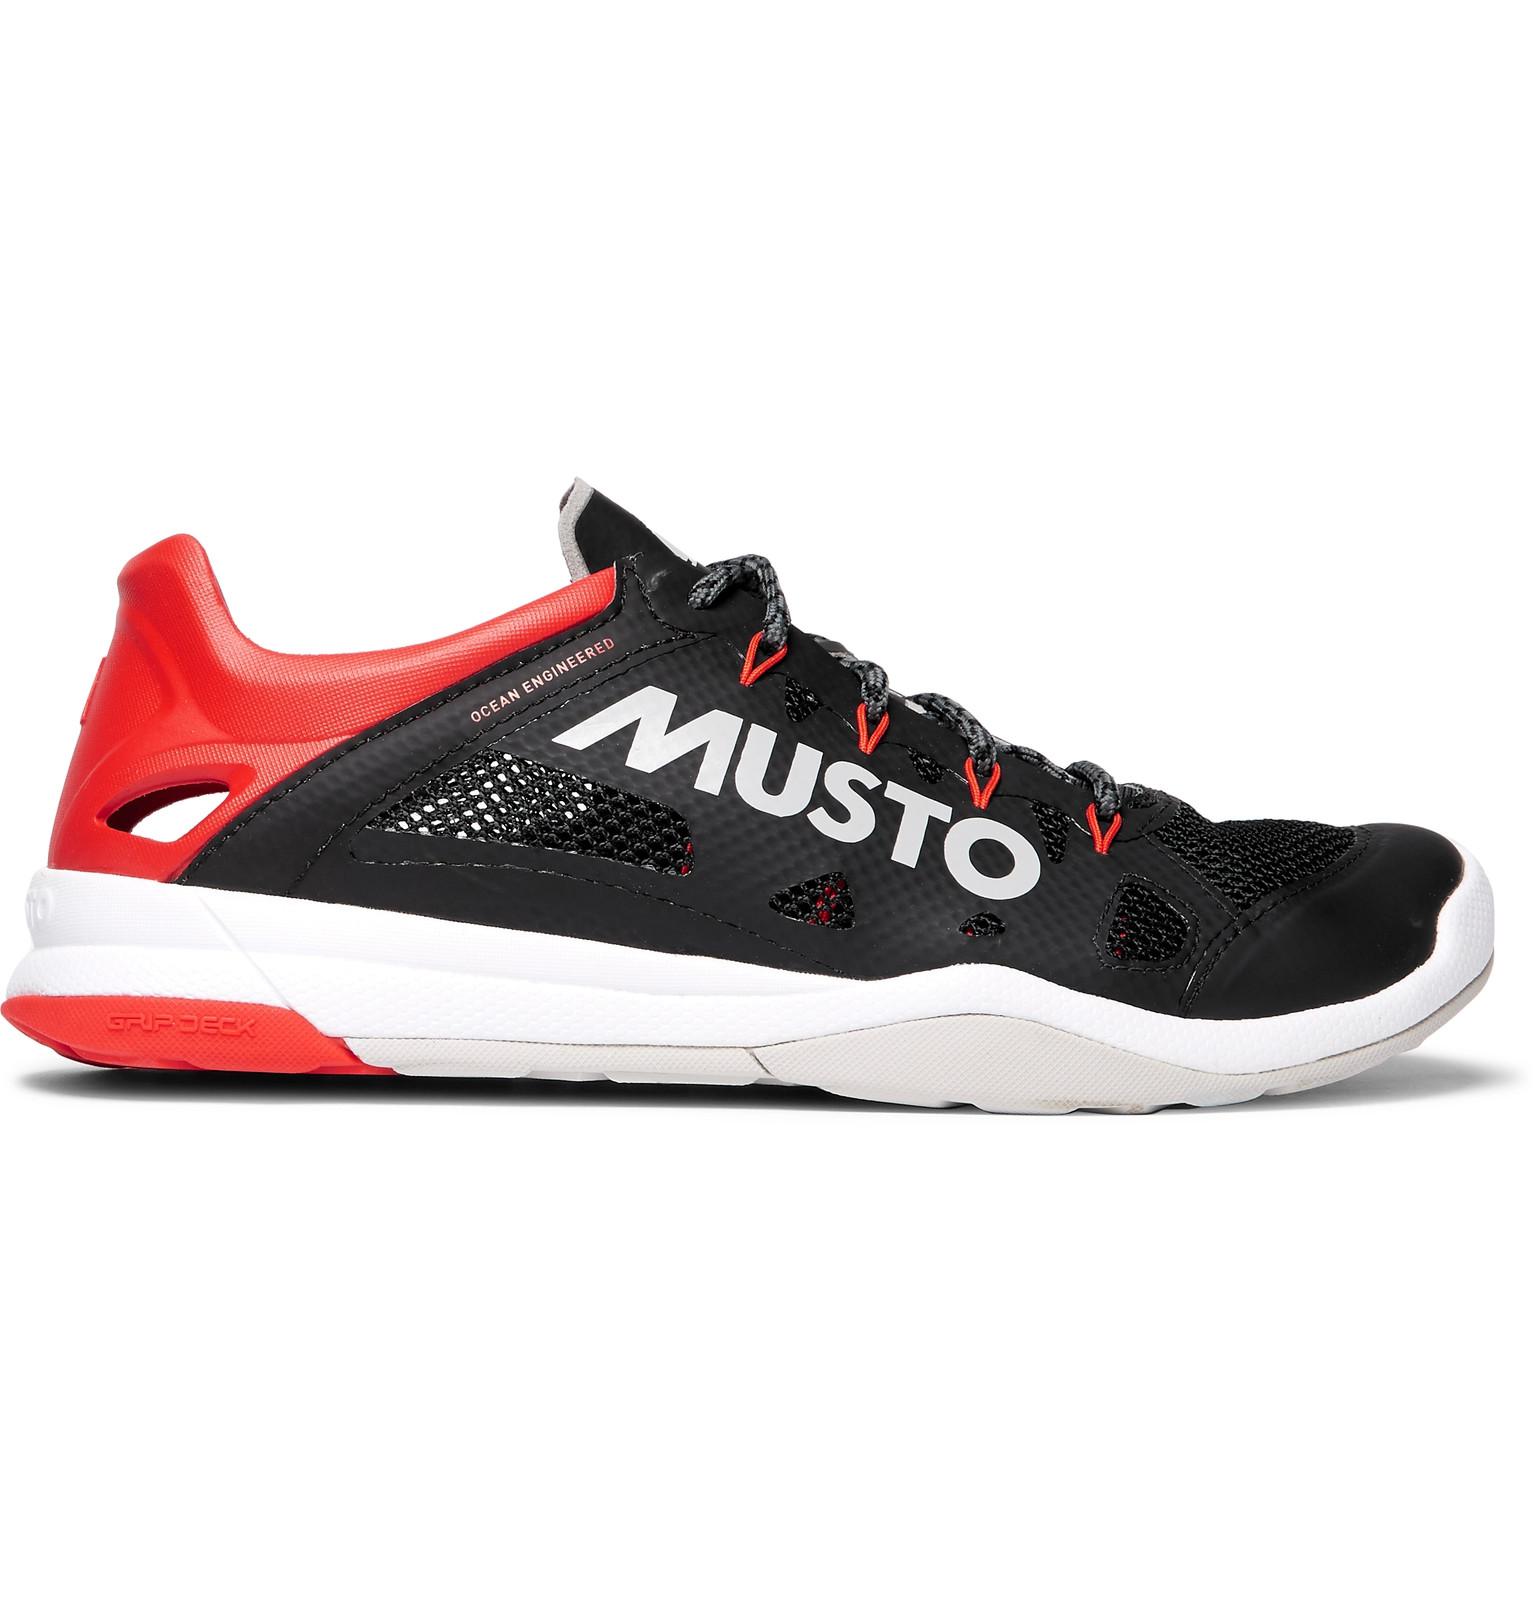 Black Your footwear needs to keep pace Musto Dynamic Pro II Sailing Yachting and Dinghy Shoes